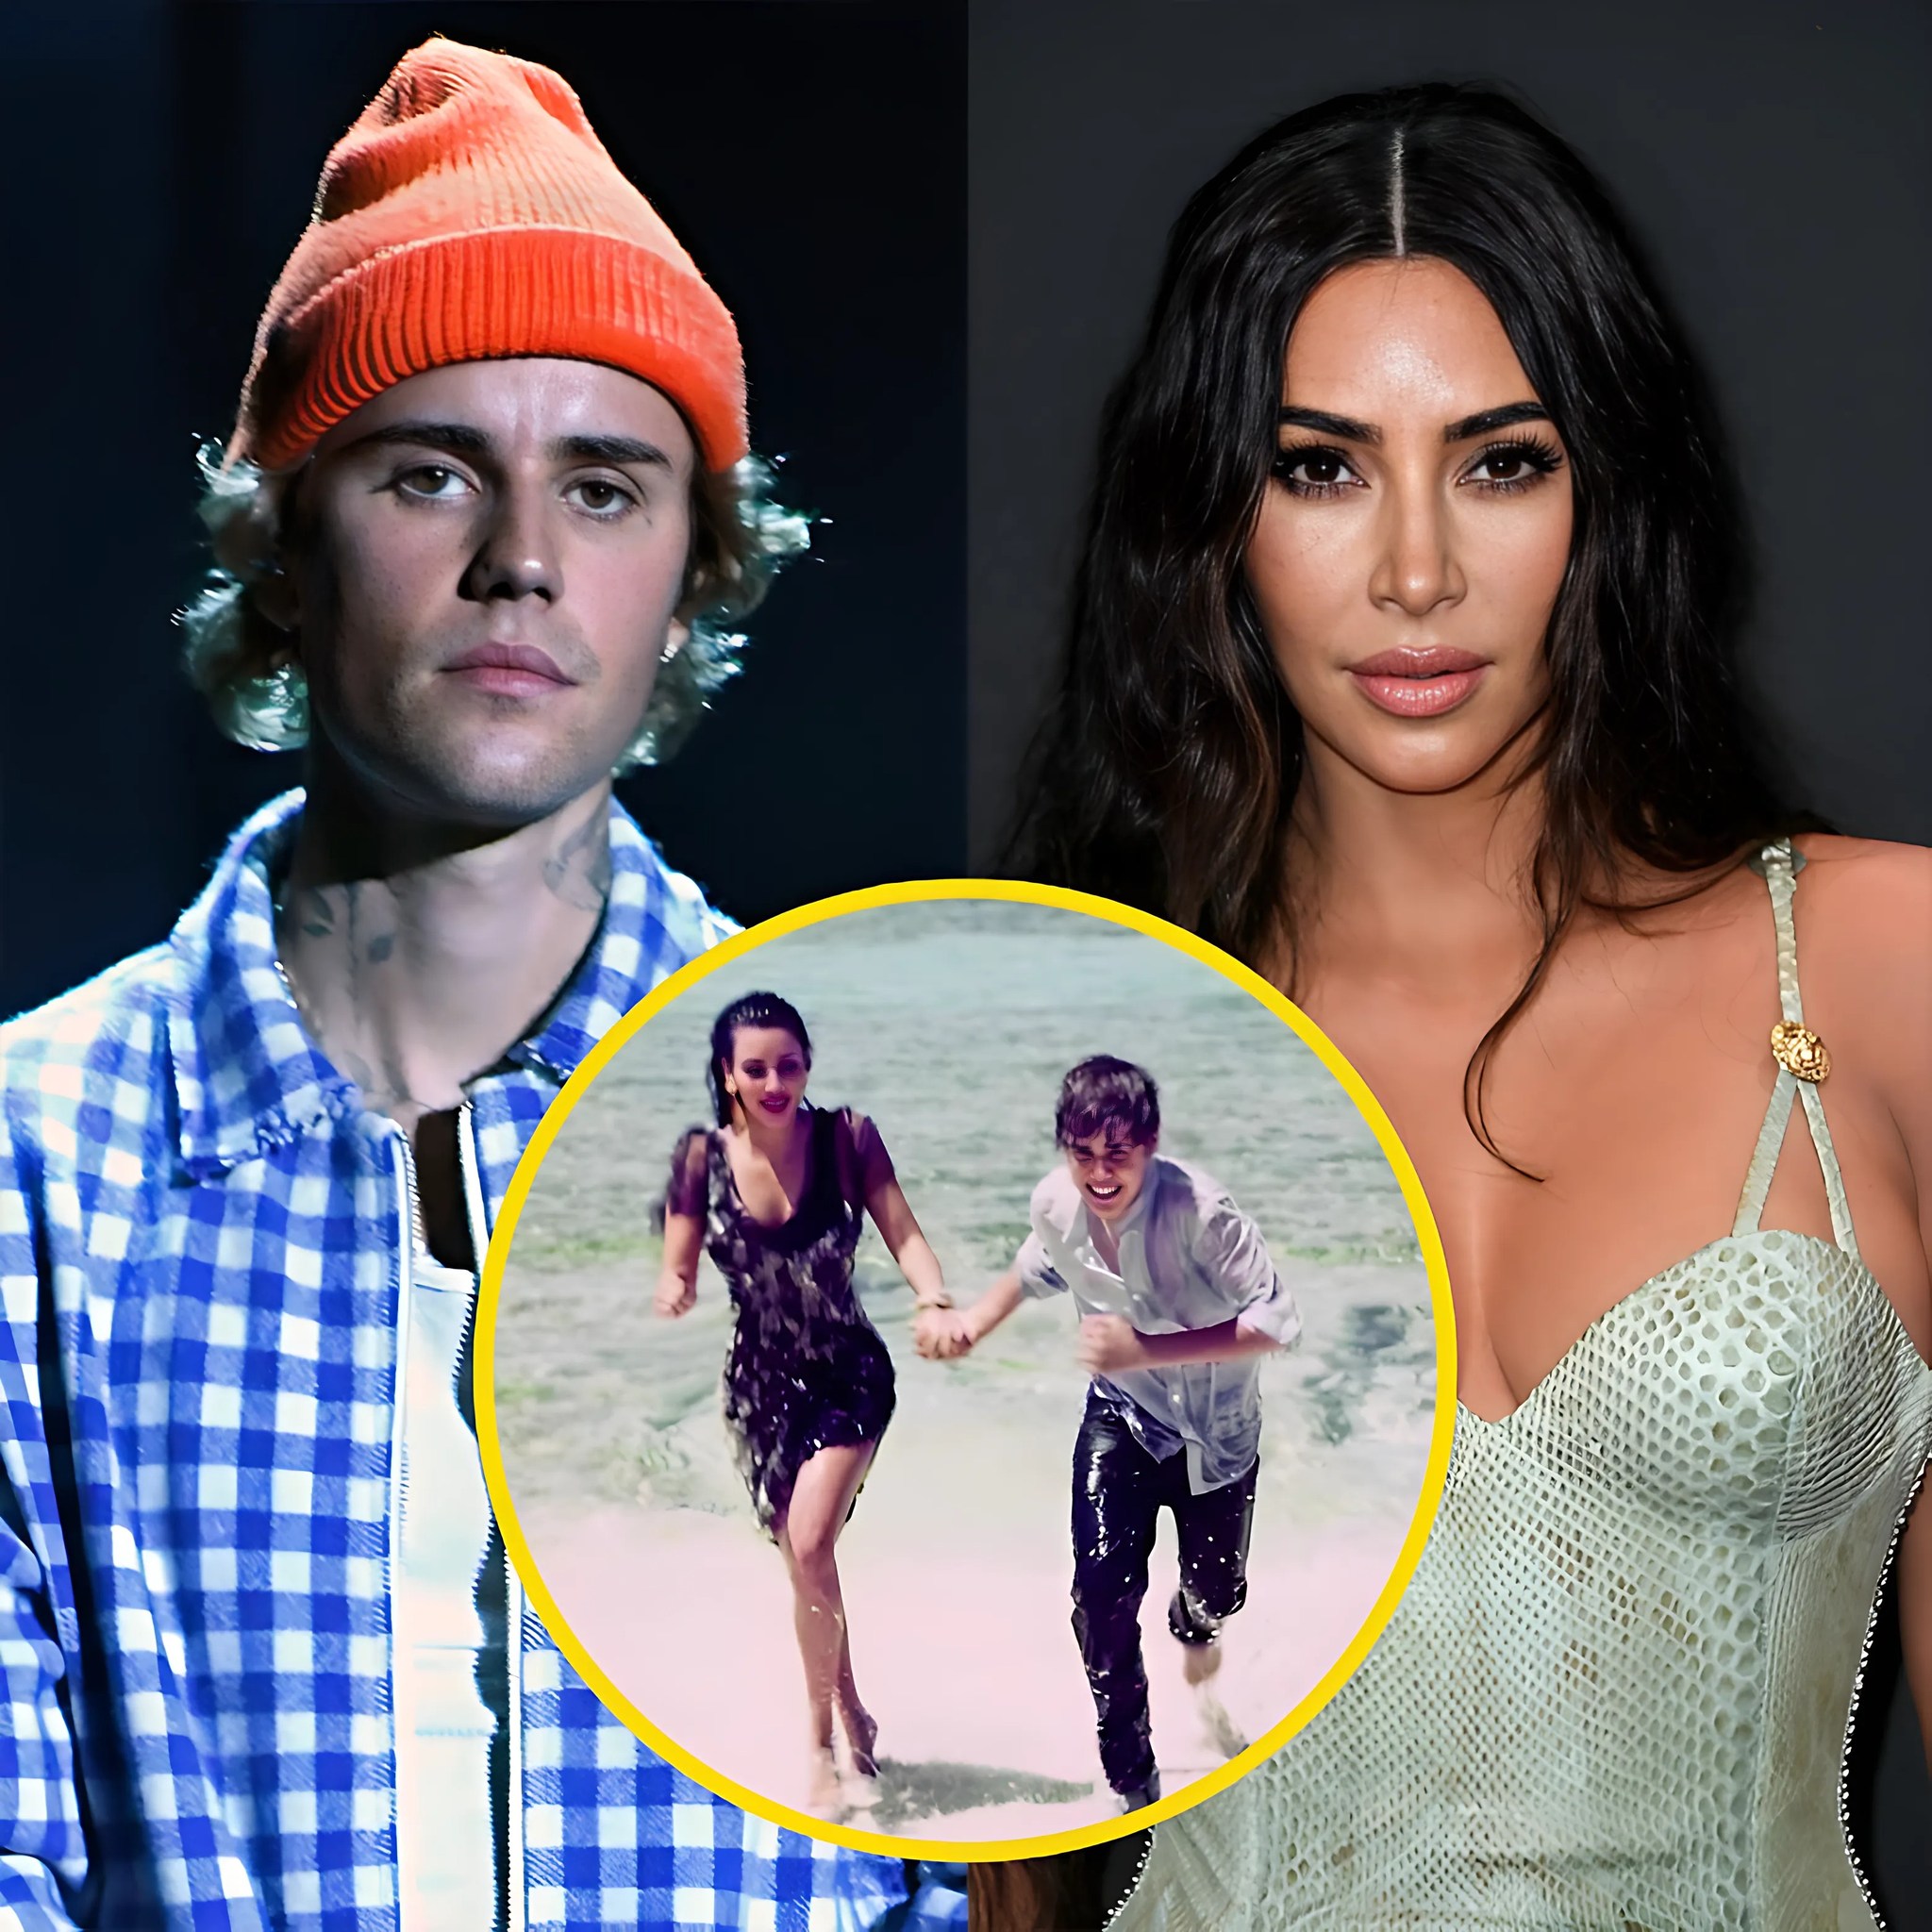 WTF*!!! Kim K is in more TROUBLE after Justin Bieber said she did worse than Diddy to him